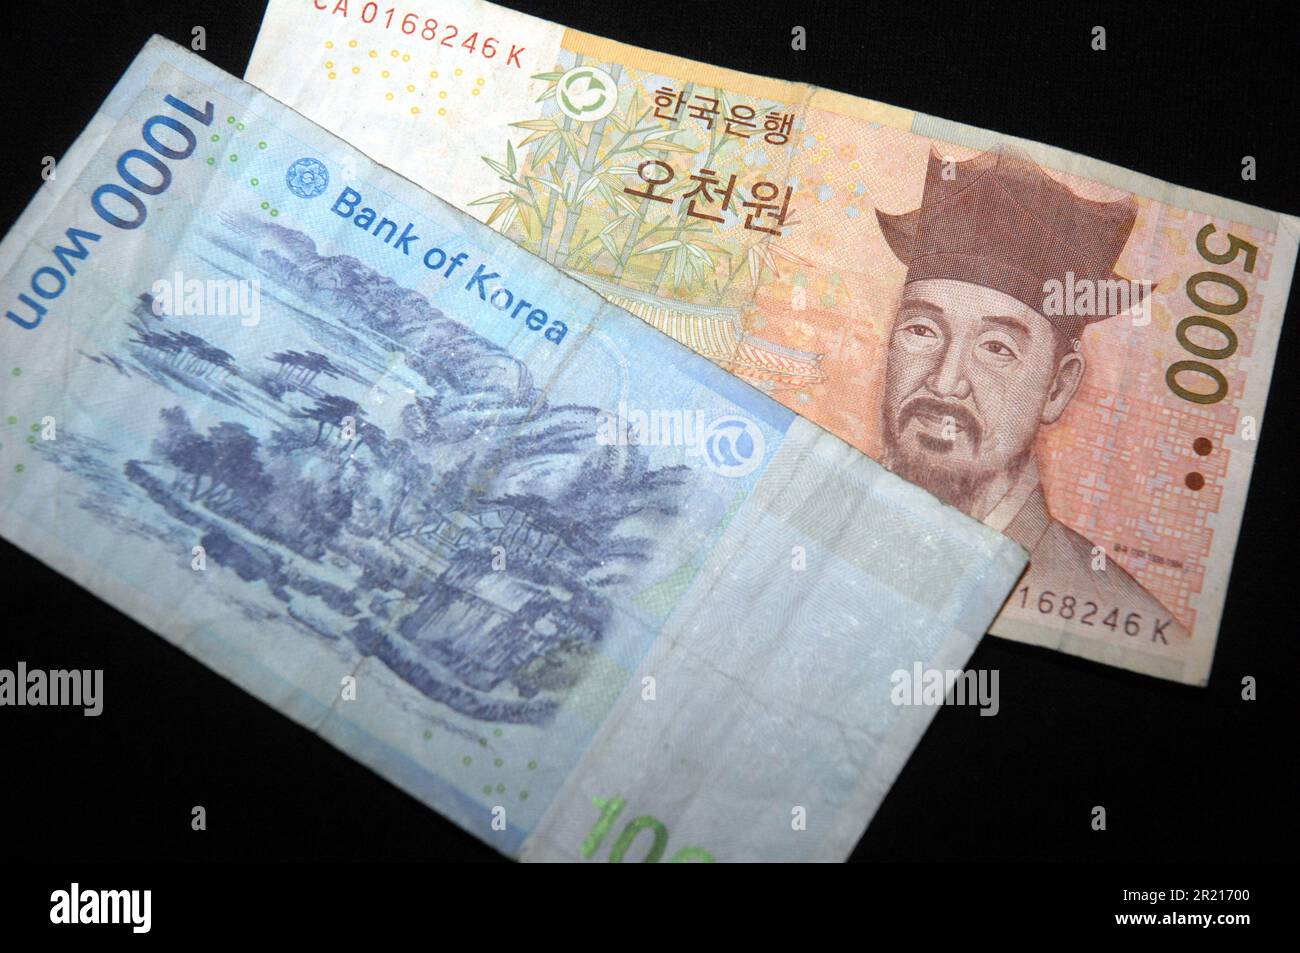 The 5000 South Korean won note front design illustrates the portrait of Yi I (1536 - 1584) was a Korean philosopher and writer who is regarded as one of the two most prominent Korean Confucian scholars of the Joseon Dynasty Stock Photo